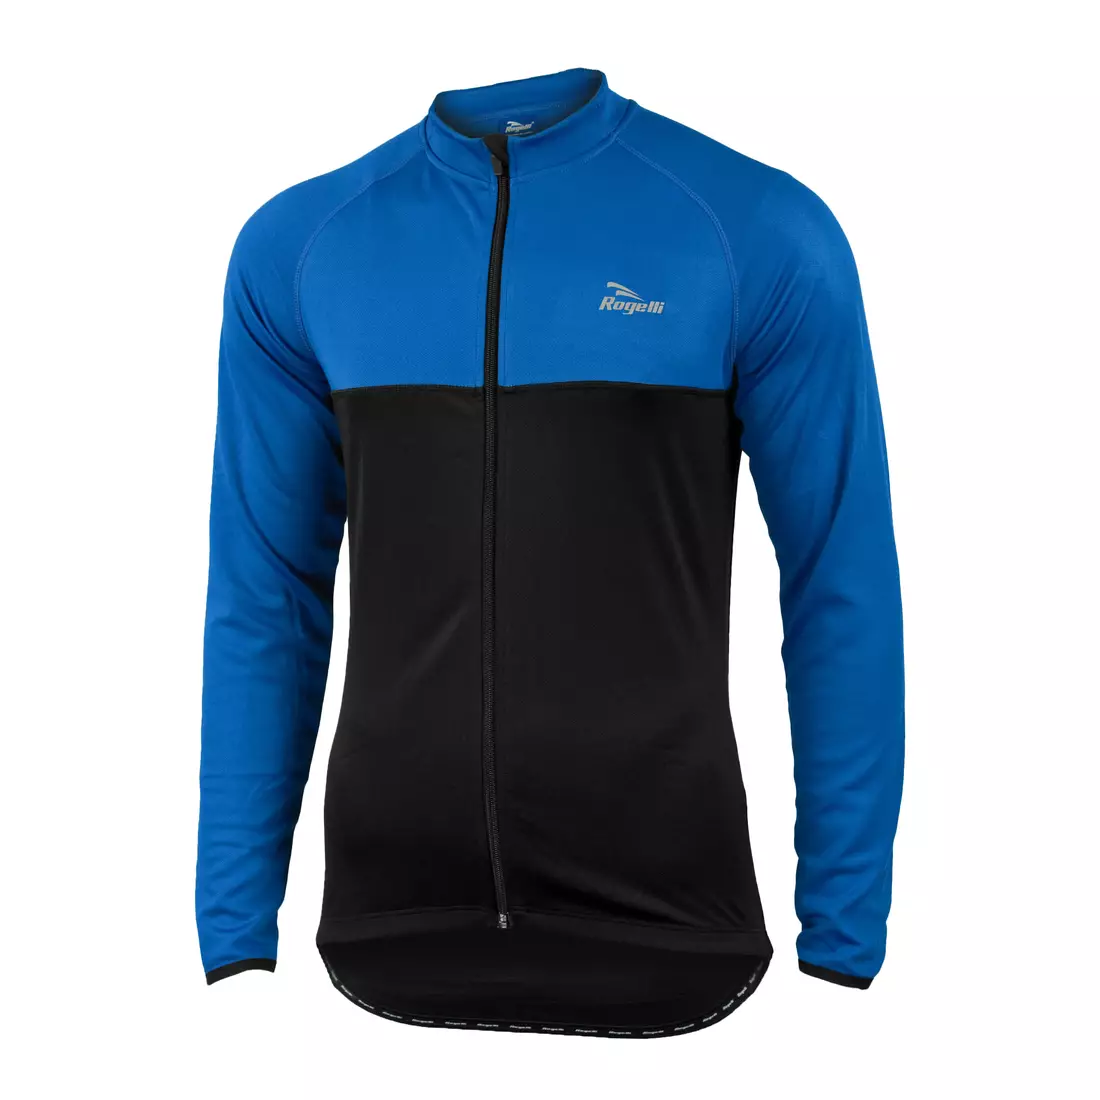 ROGELLI CALUSO - slightly insulated cycling sweatshirt, color: Black and blue